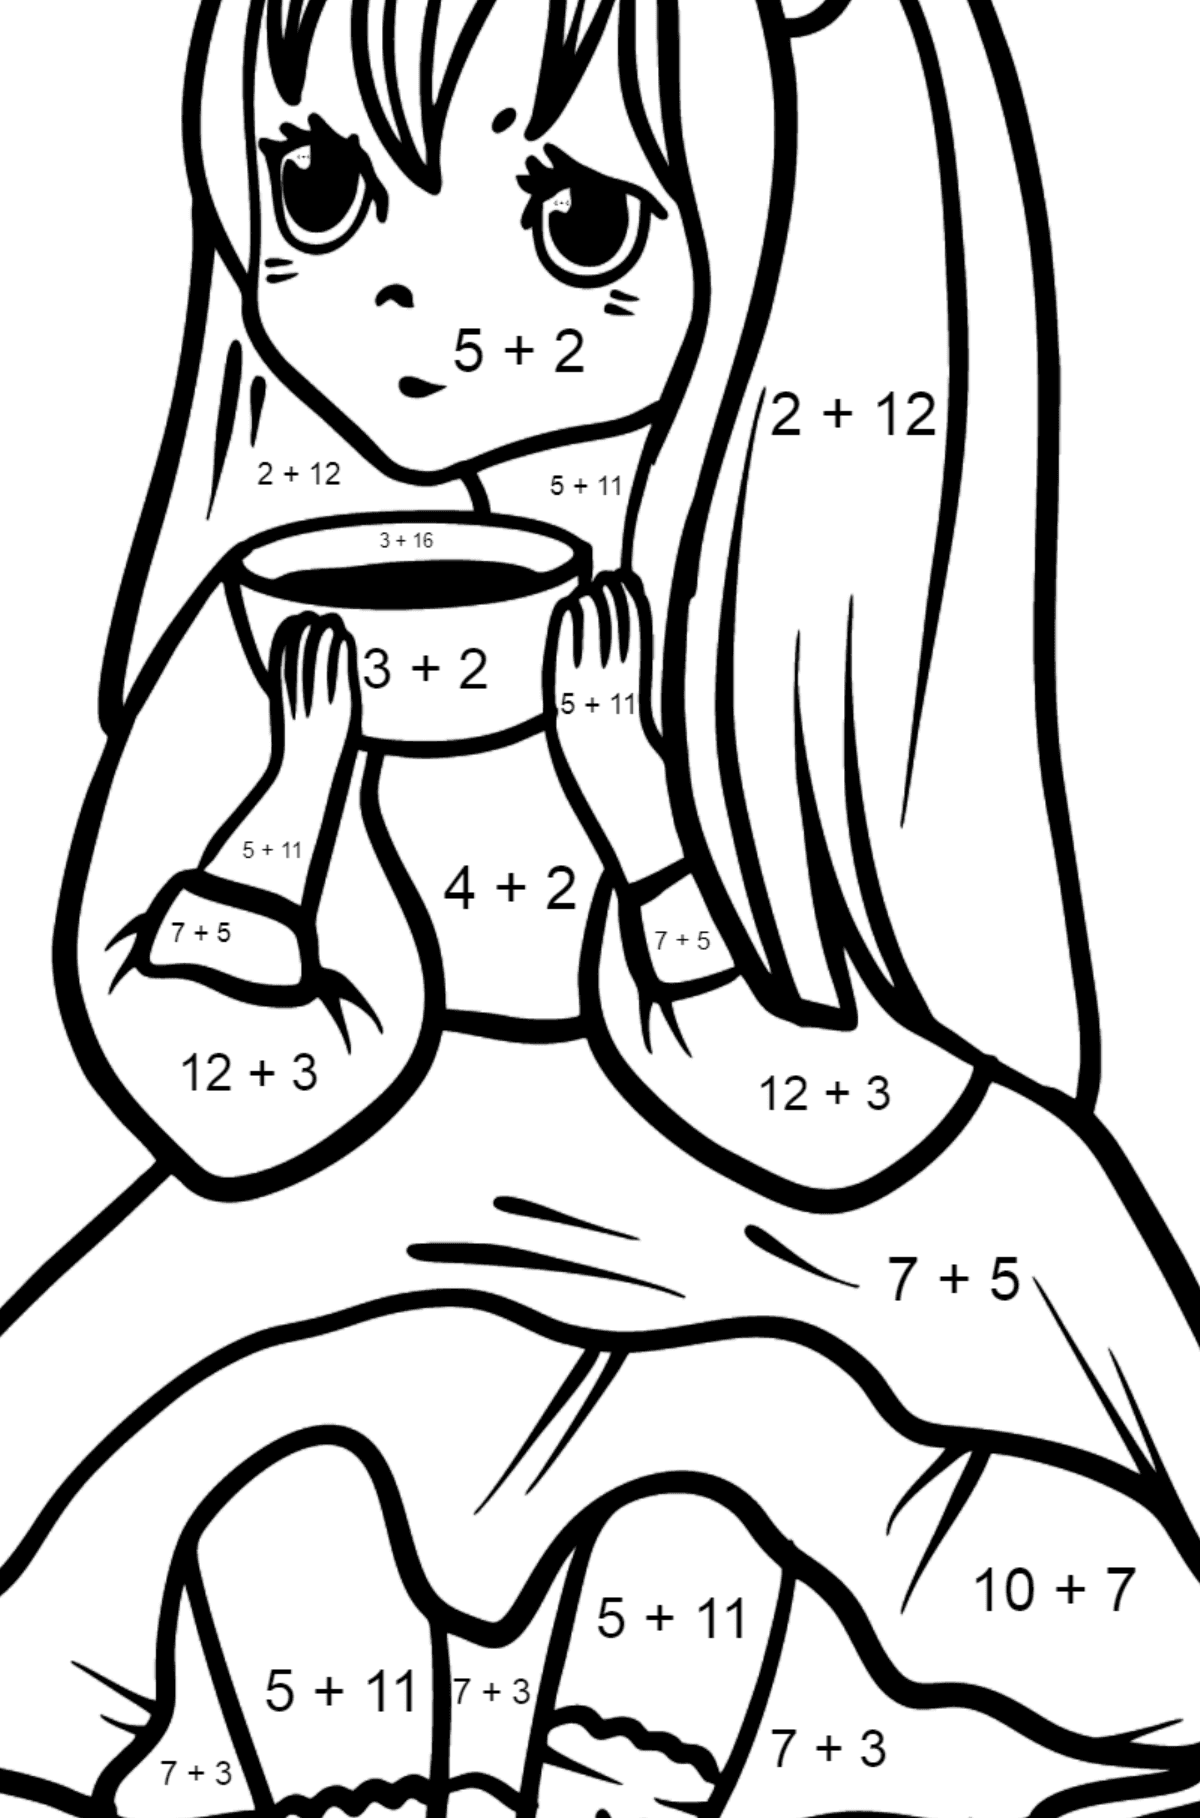 Anime Girl Drinking Coffee coloring page - Math Coloring - Addition for Kids